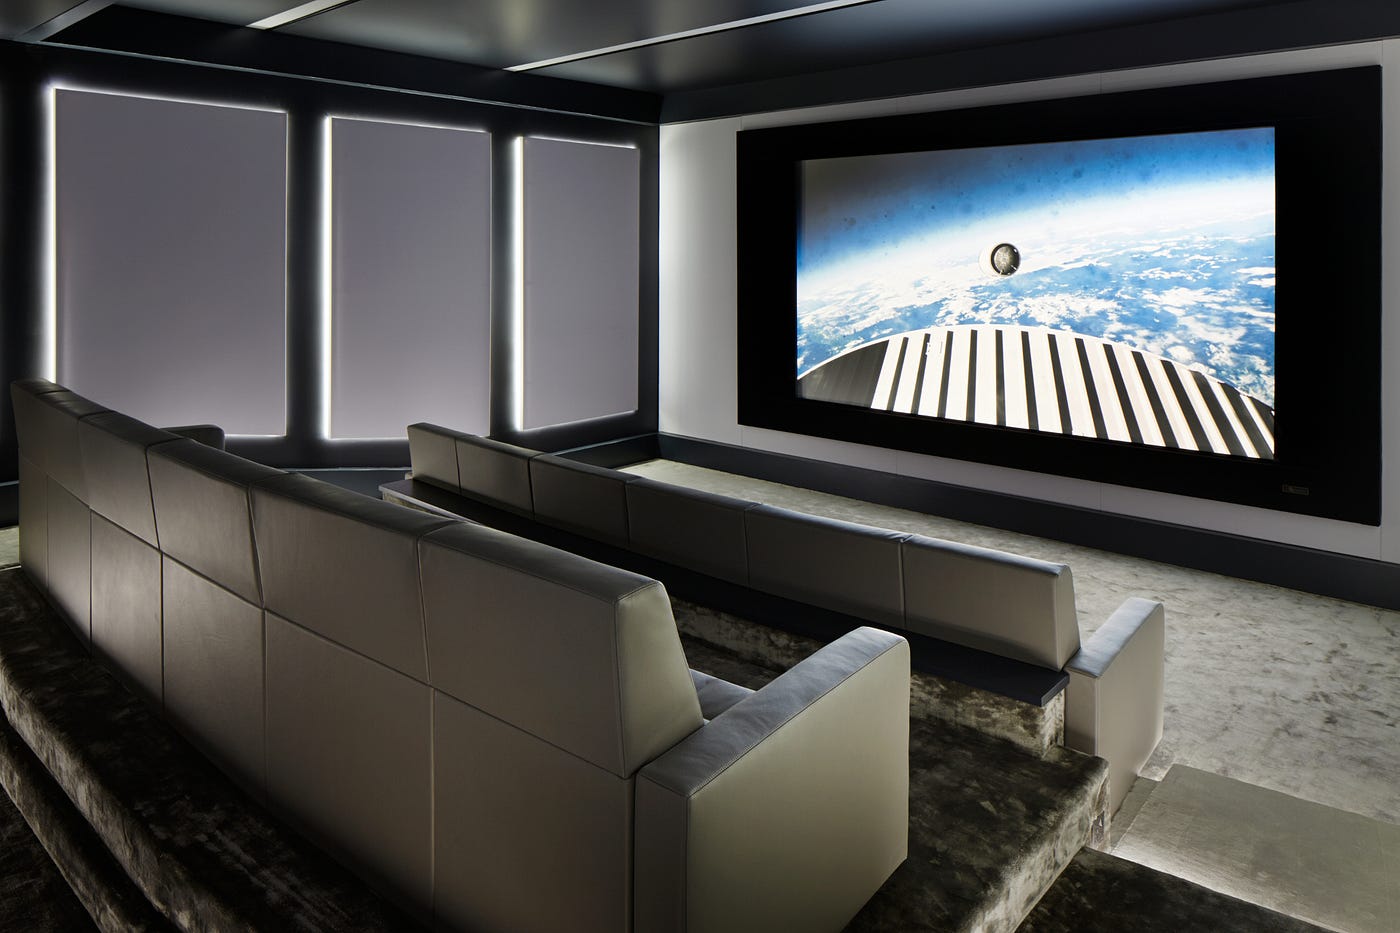 Three Types of Home Cinema Rooms. A bespoke Home Cinema is an exciting…, by Matt Davey, IQ Furniture